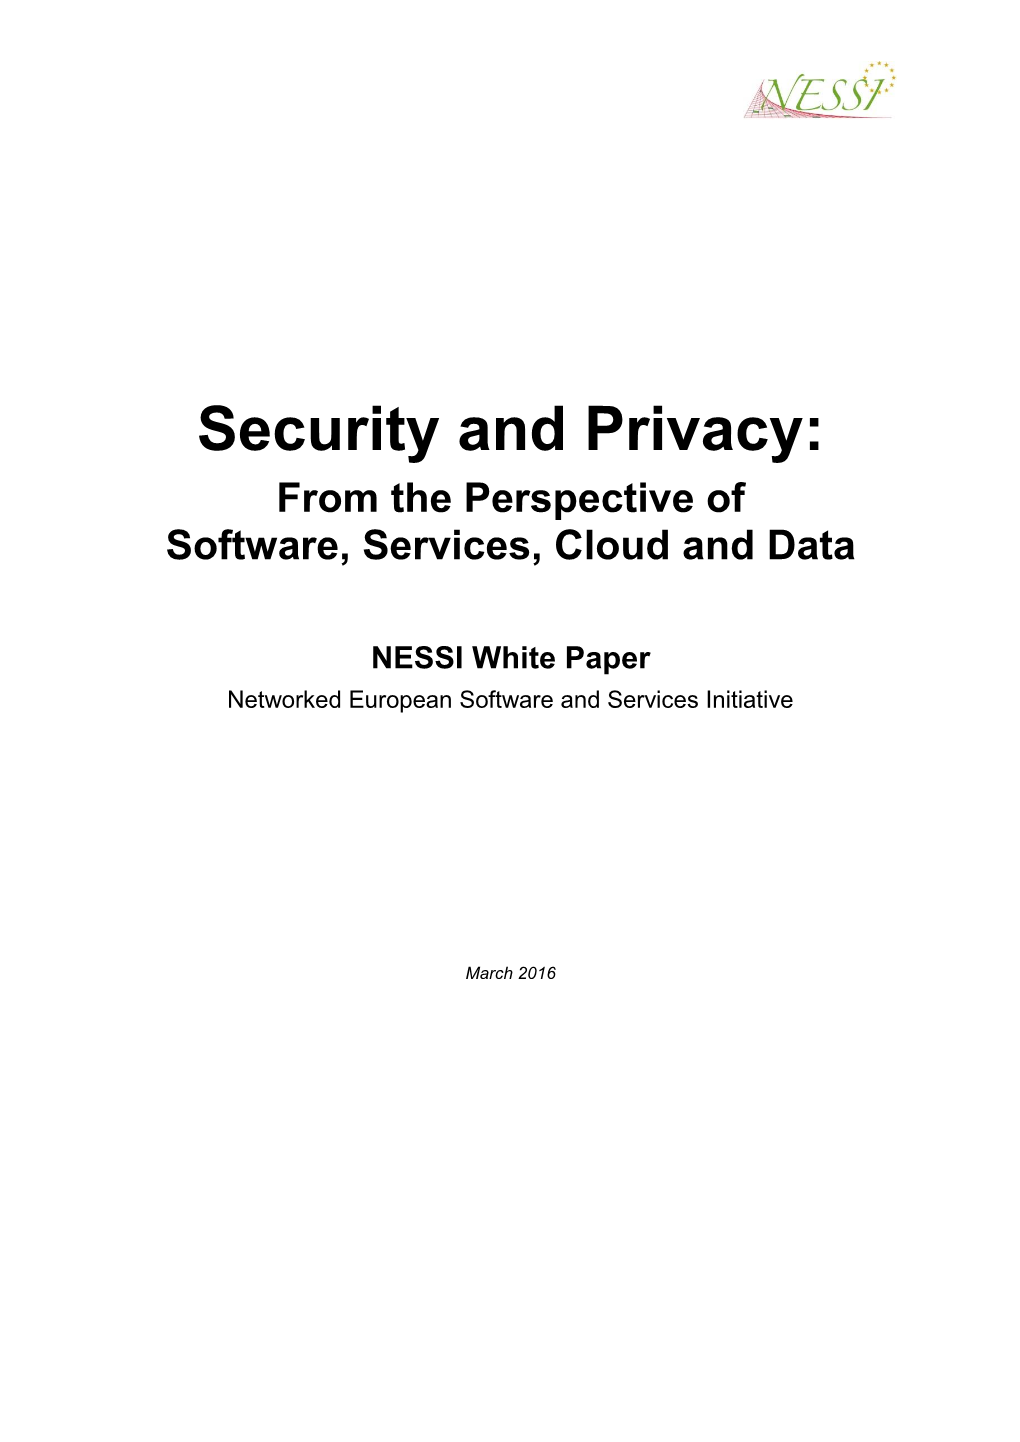 NESSI Security and Privacy White Paper